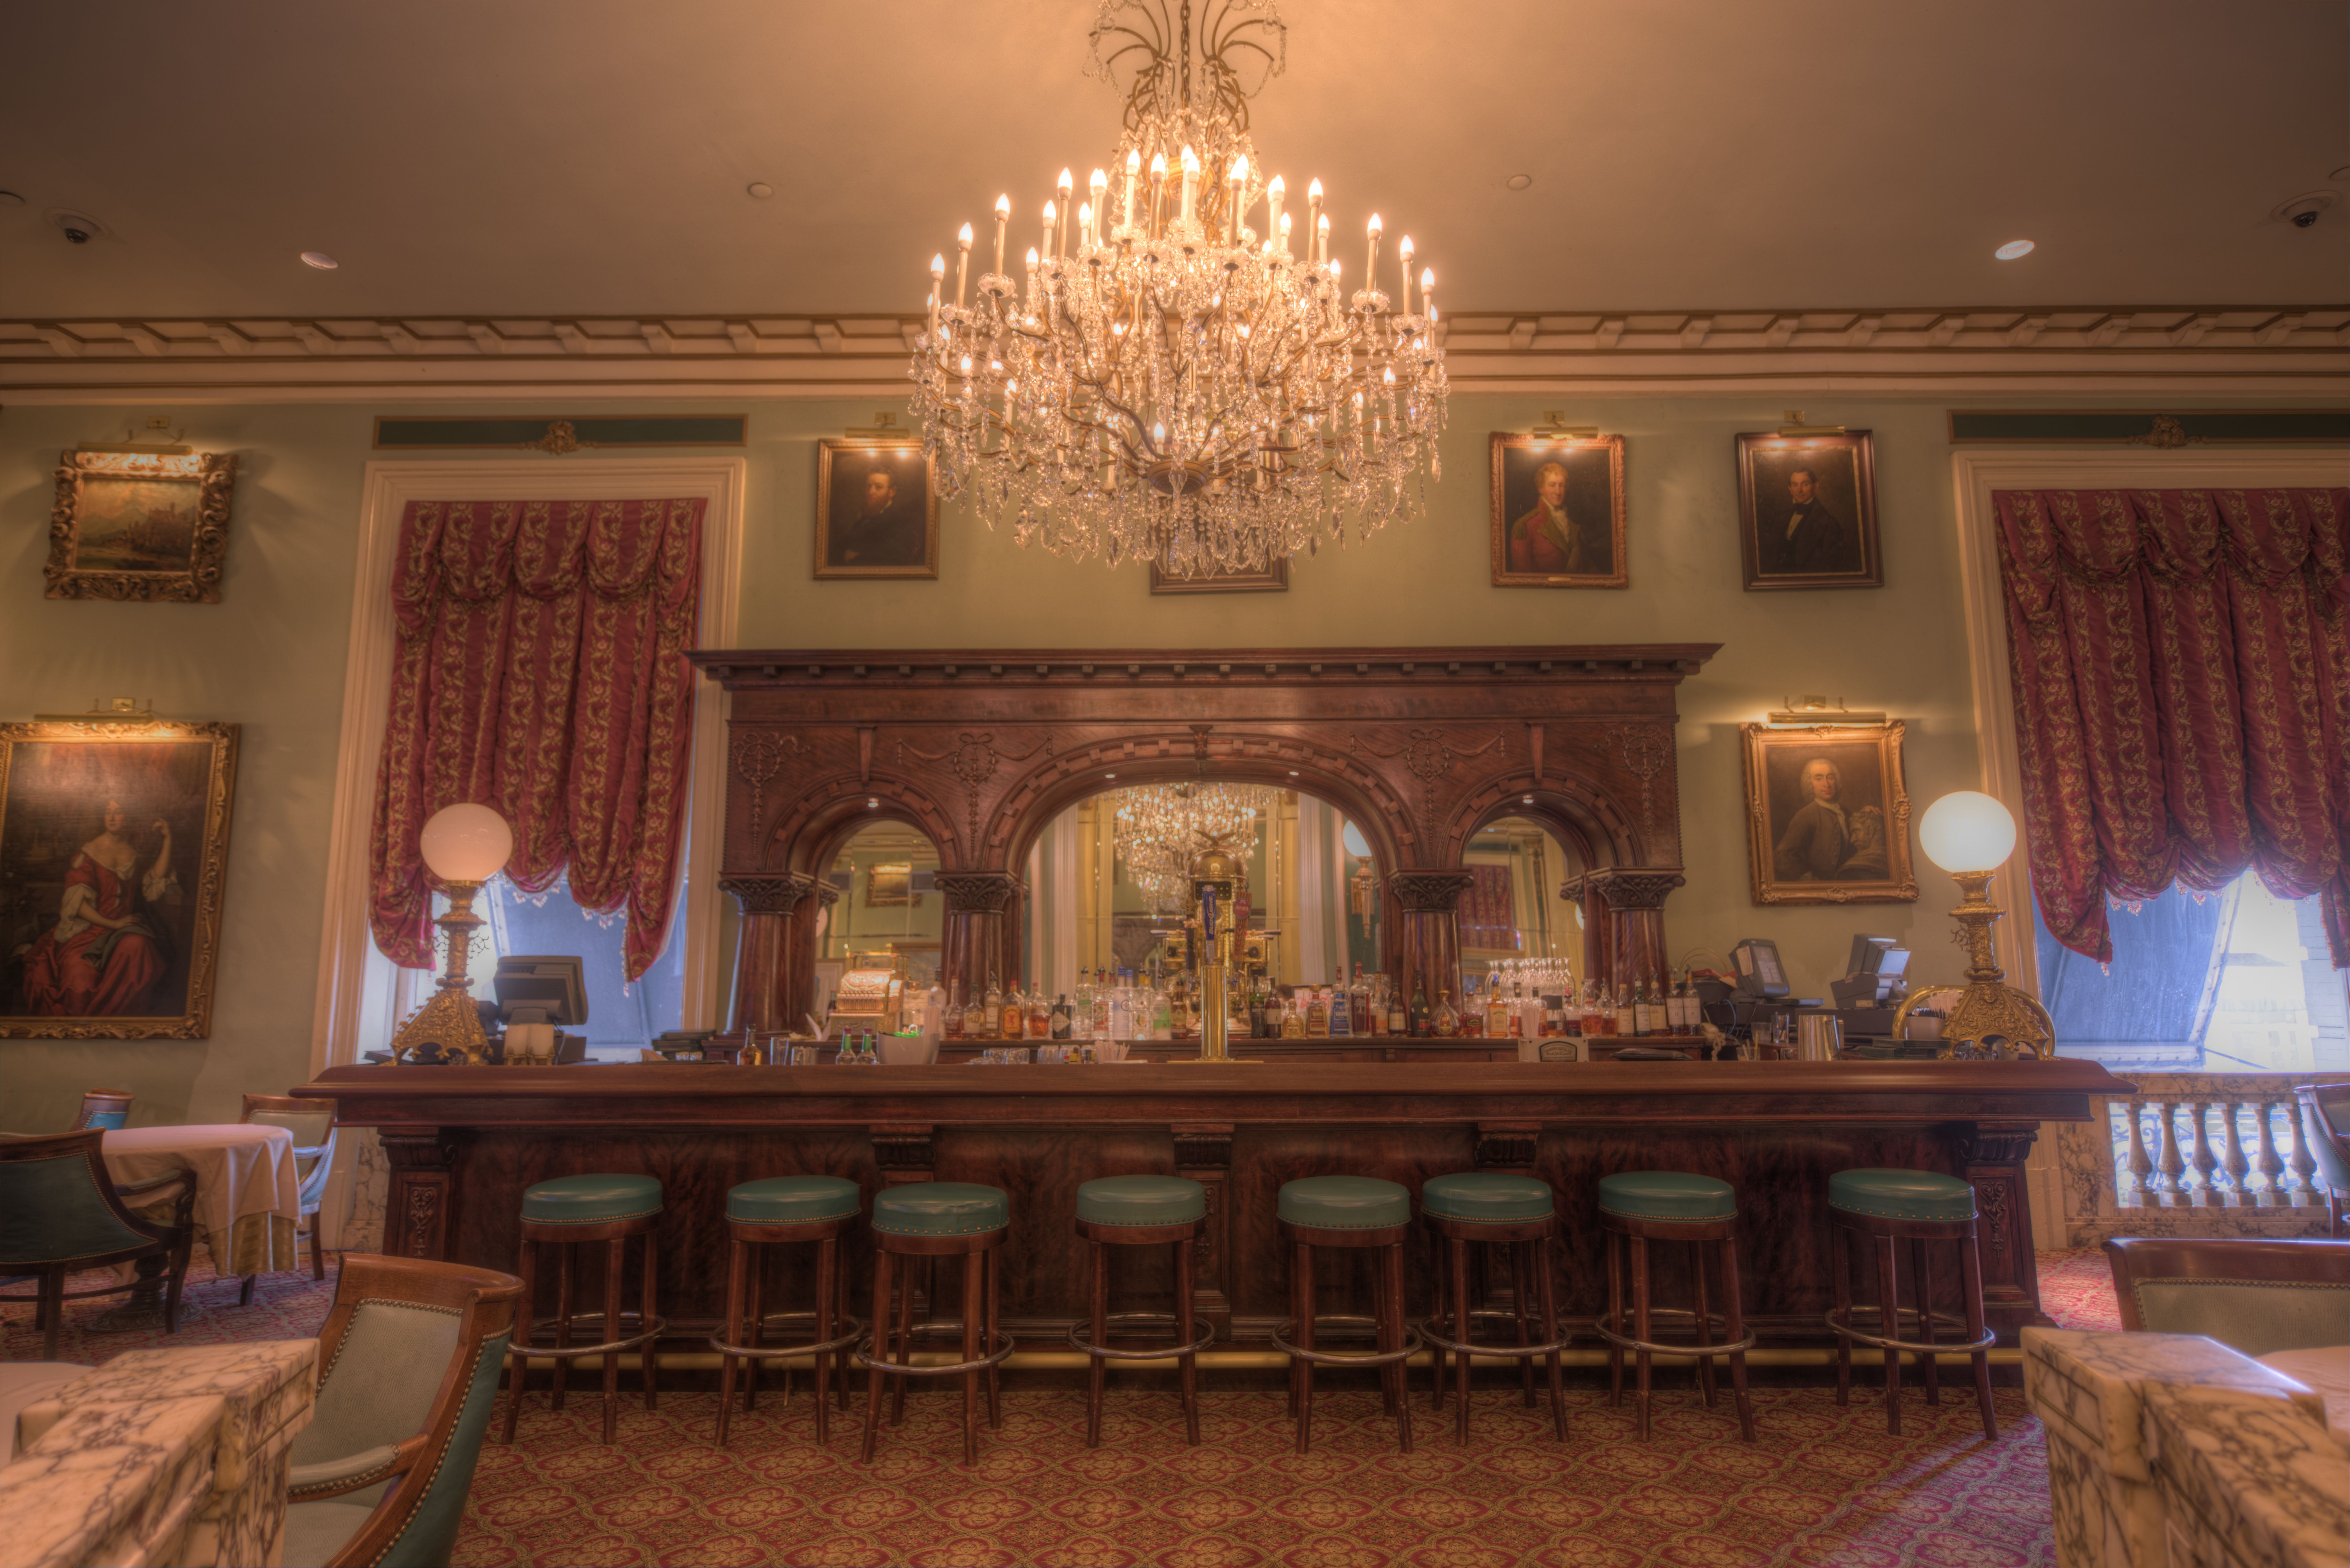 A Photo of the Victorian Bar at the Haunted Le Pavillon Hotel, which is located in New Orleans, Louisiana.